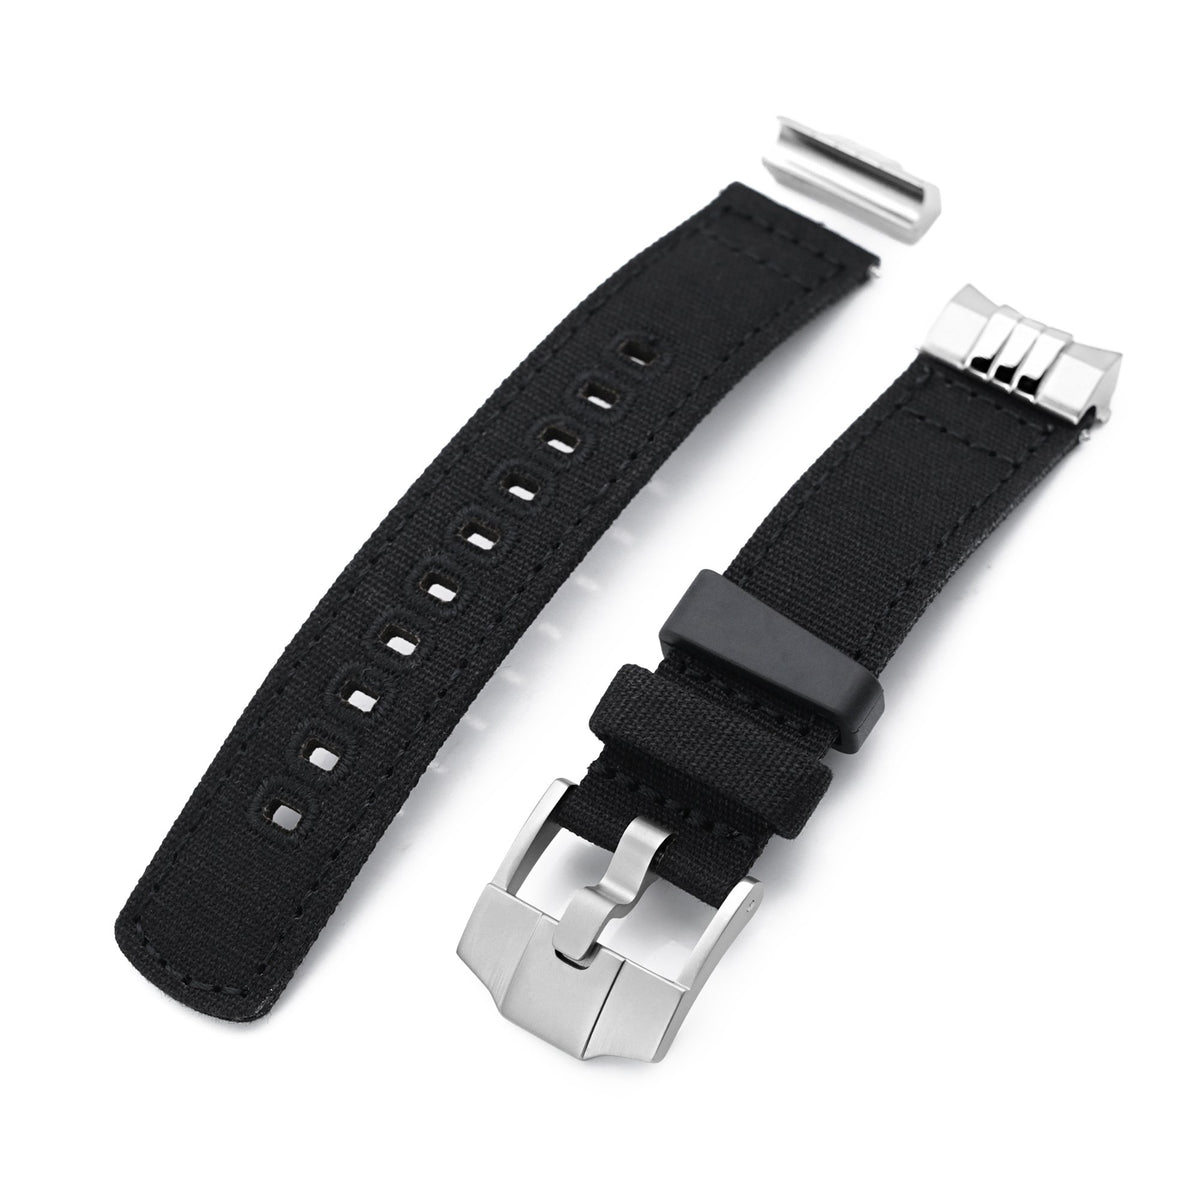 Black Quick Release Canvas + Add-on End Piece watch strap for Seiko Sumo SPB103 Strapcode Watch Bands